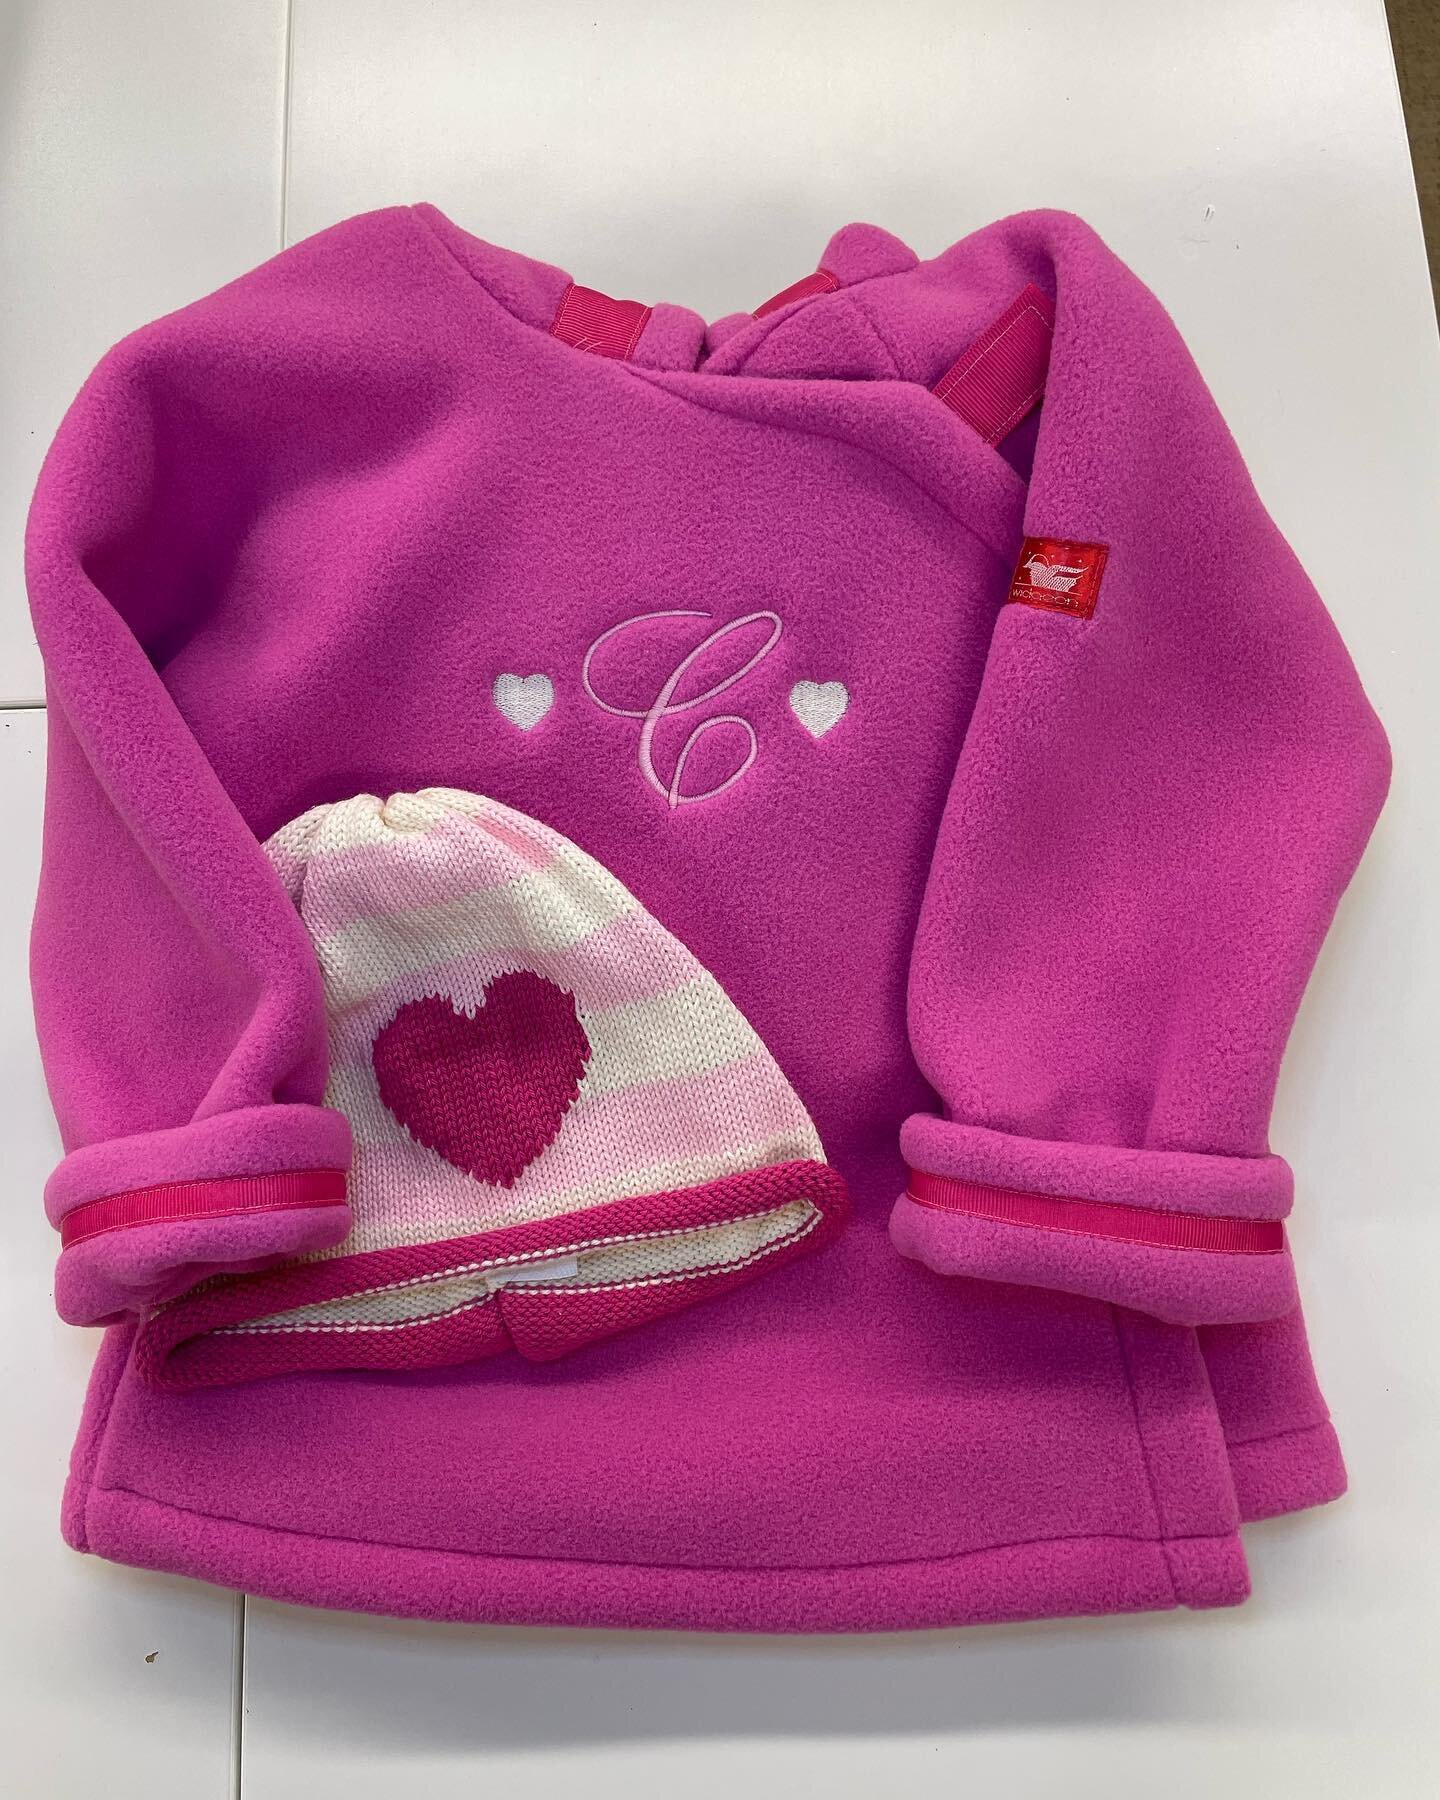 Our favorite fleece and custom knit beanie are perfect for these autumn days&hellip; #custom #childrenswear #pink #livelovelocal #justaddembroidery